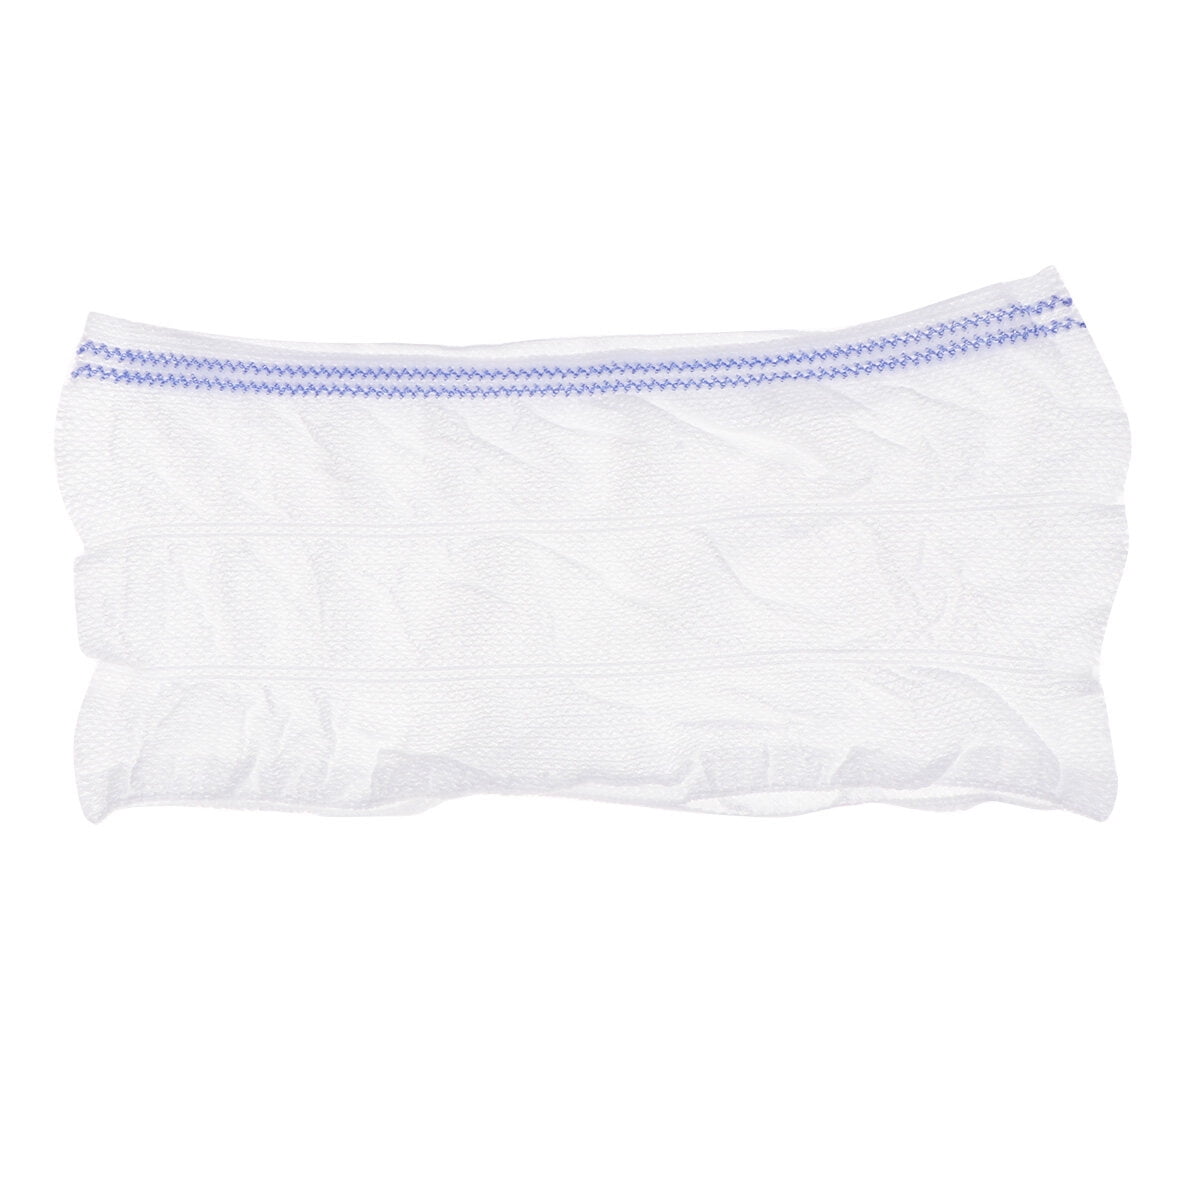 Mesh Panties Underwear Disposable Briefs Diapers Fixed Hospital Postpartum  Incontinence Washable Maternity Recovery